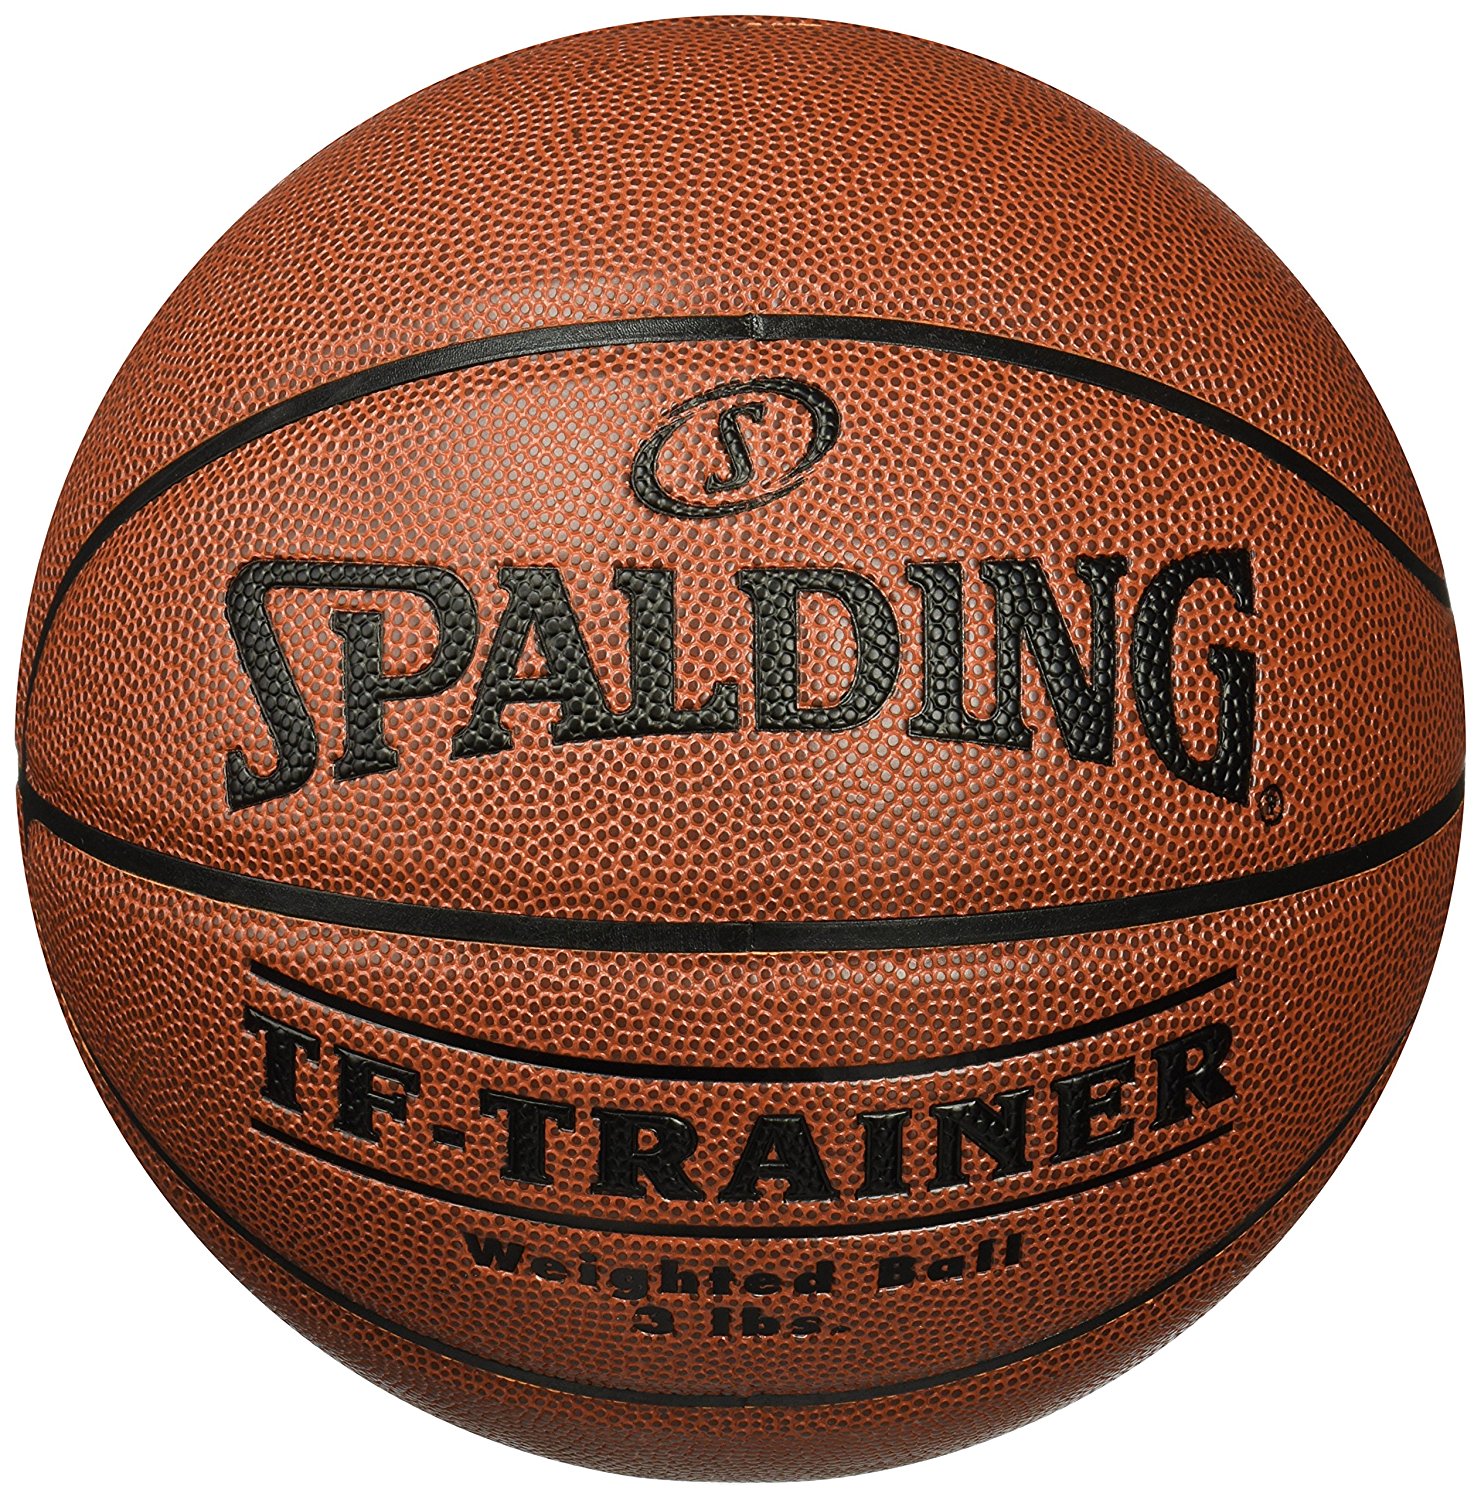 Spalding TF-Trainer Weighted Trainer Ball - 3lbs - HoopDirt